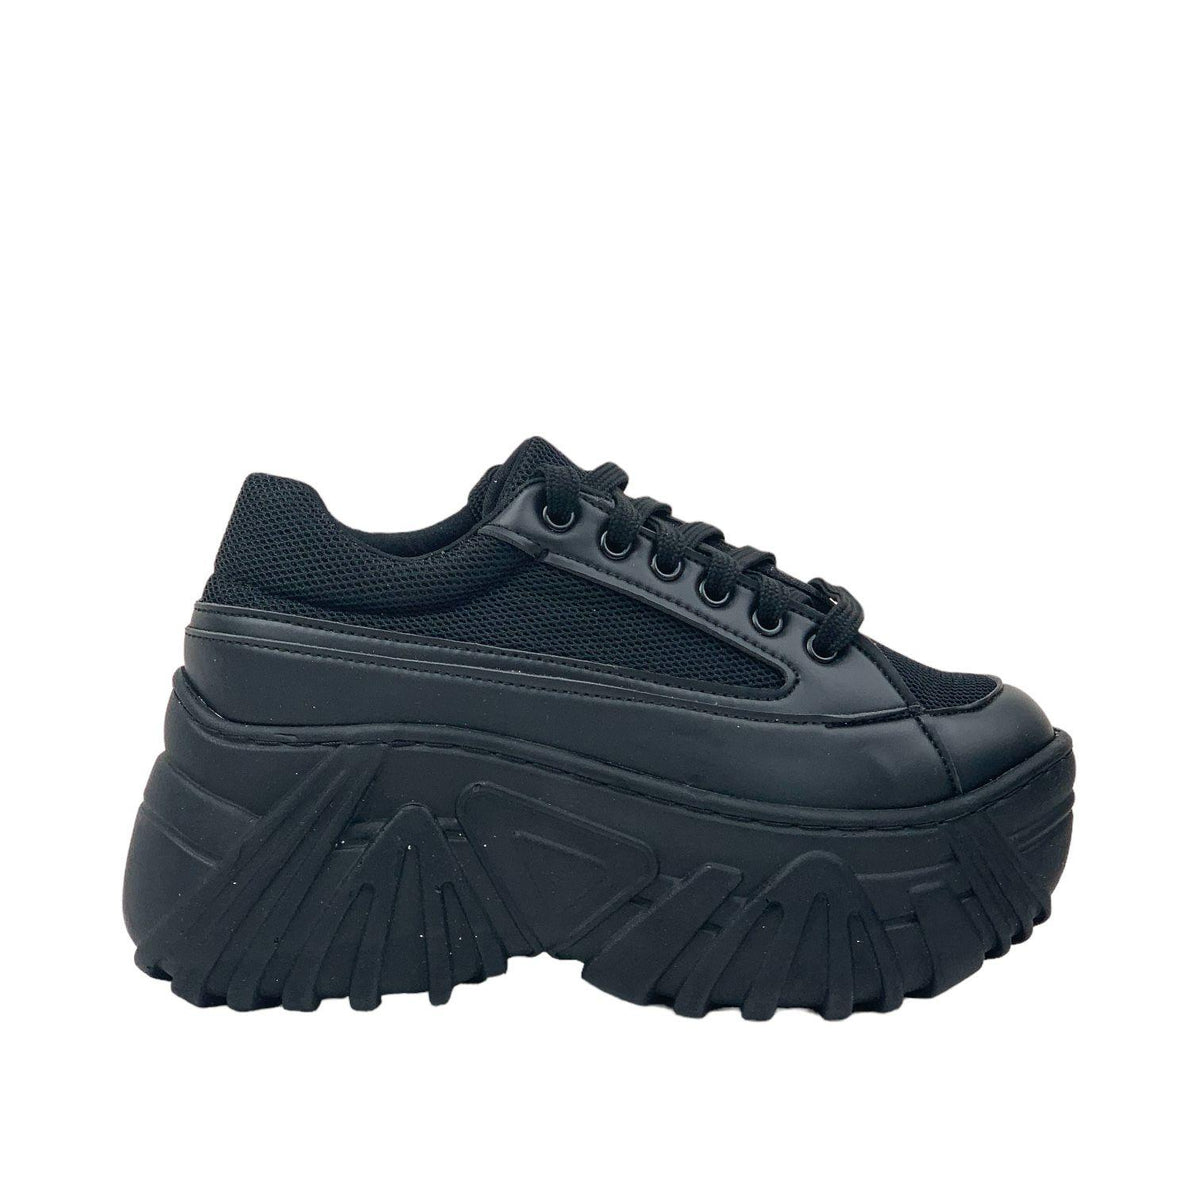 Women's shanny black high sole sneaker sports shoes - STREETMODE™